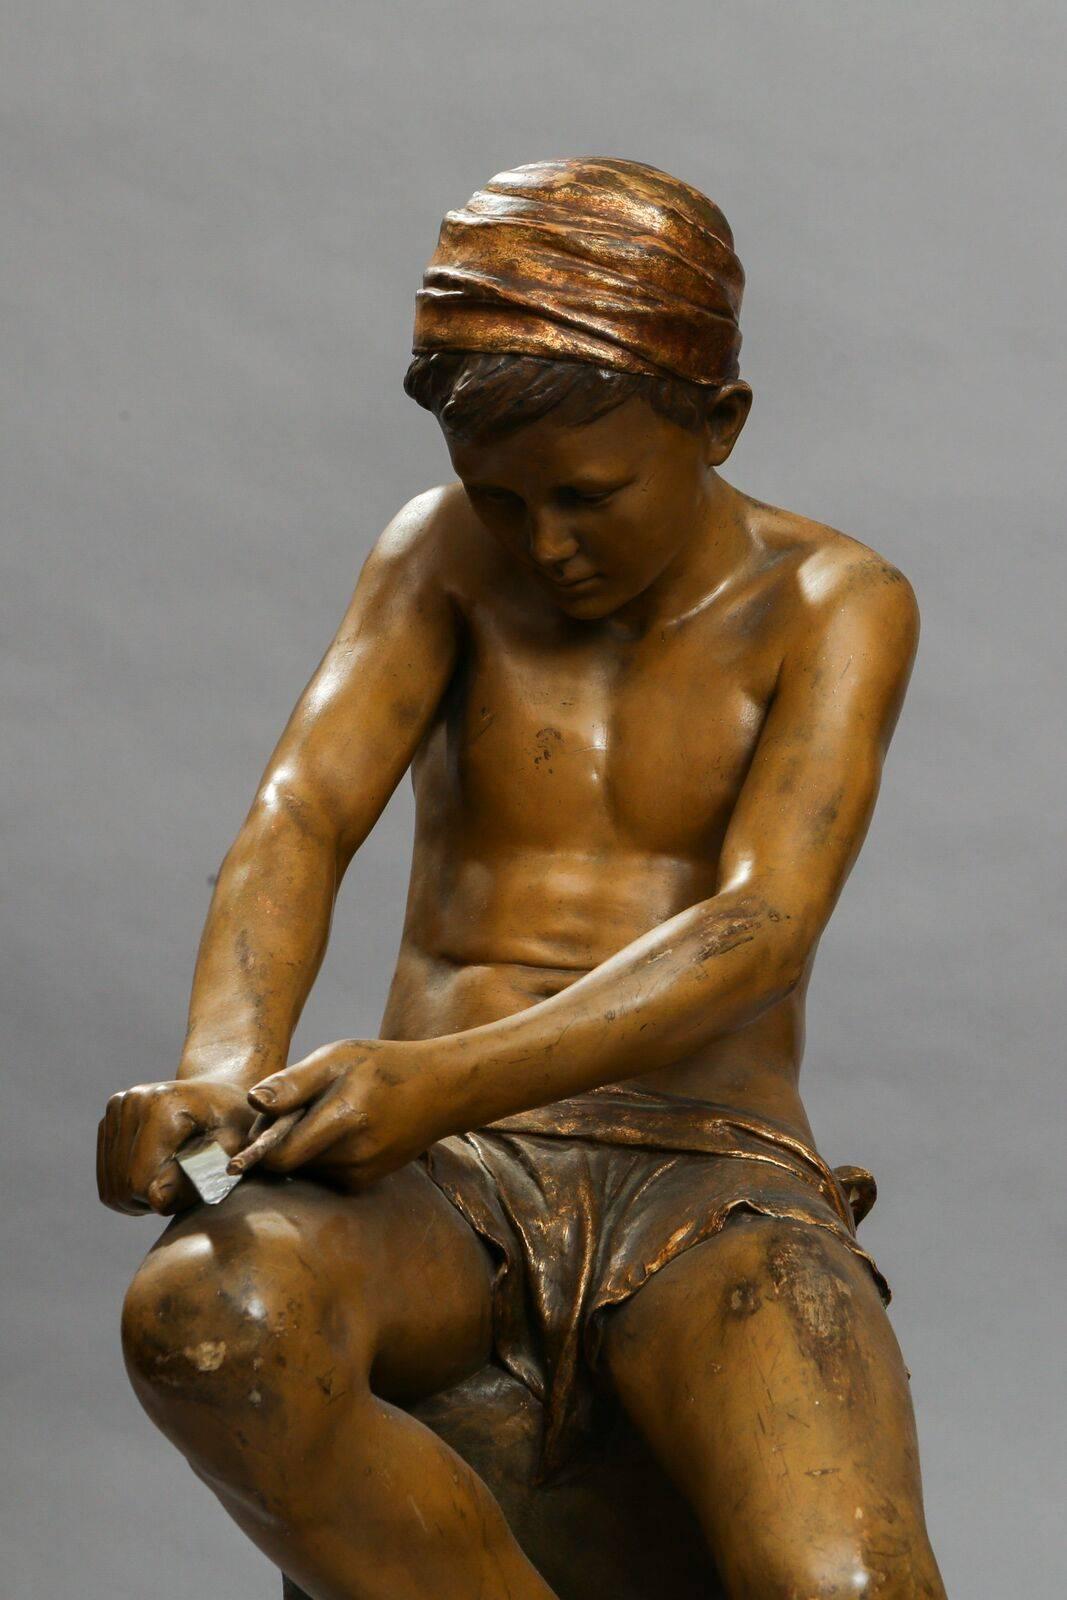 A polychrome terracotta figure of a young seated boy carving. He is holding a metal knife in one hand and is sharpening/carving a stick in the right hand. The figure is signed and marked on the back of the base with the numbers '1067/58/24' and a